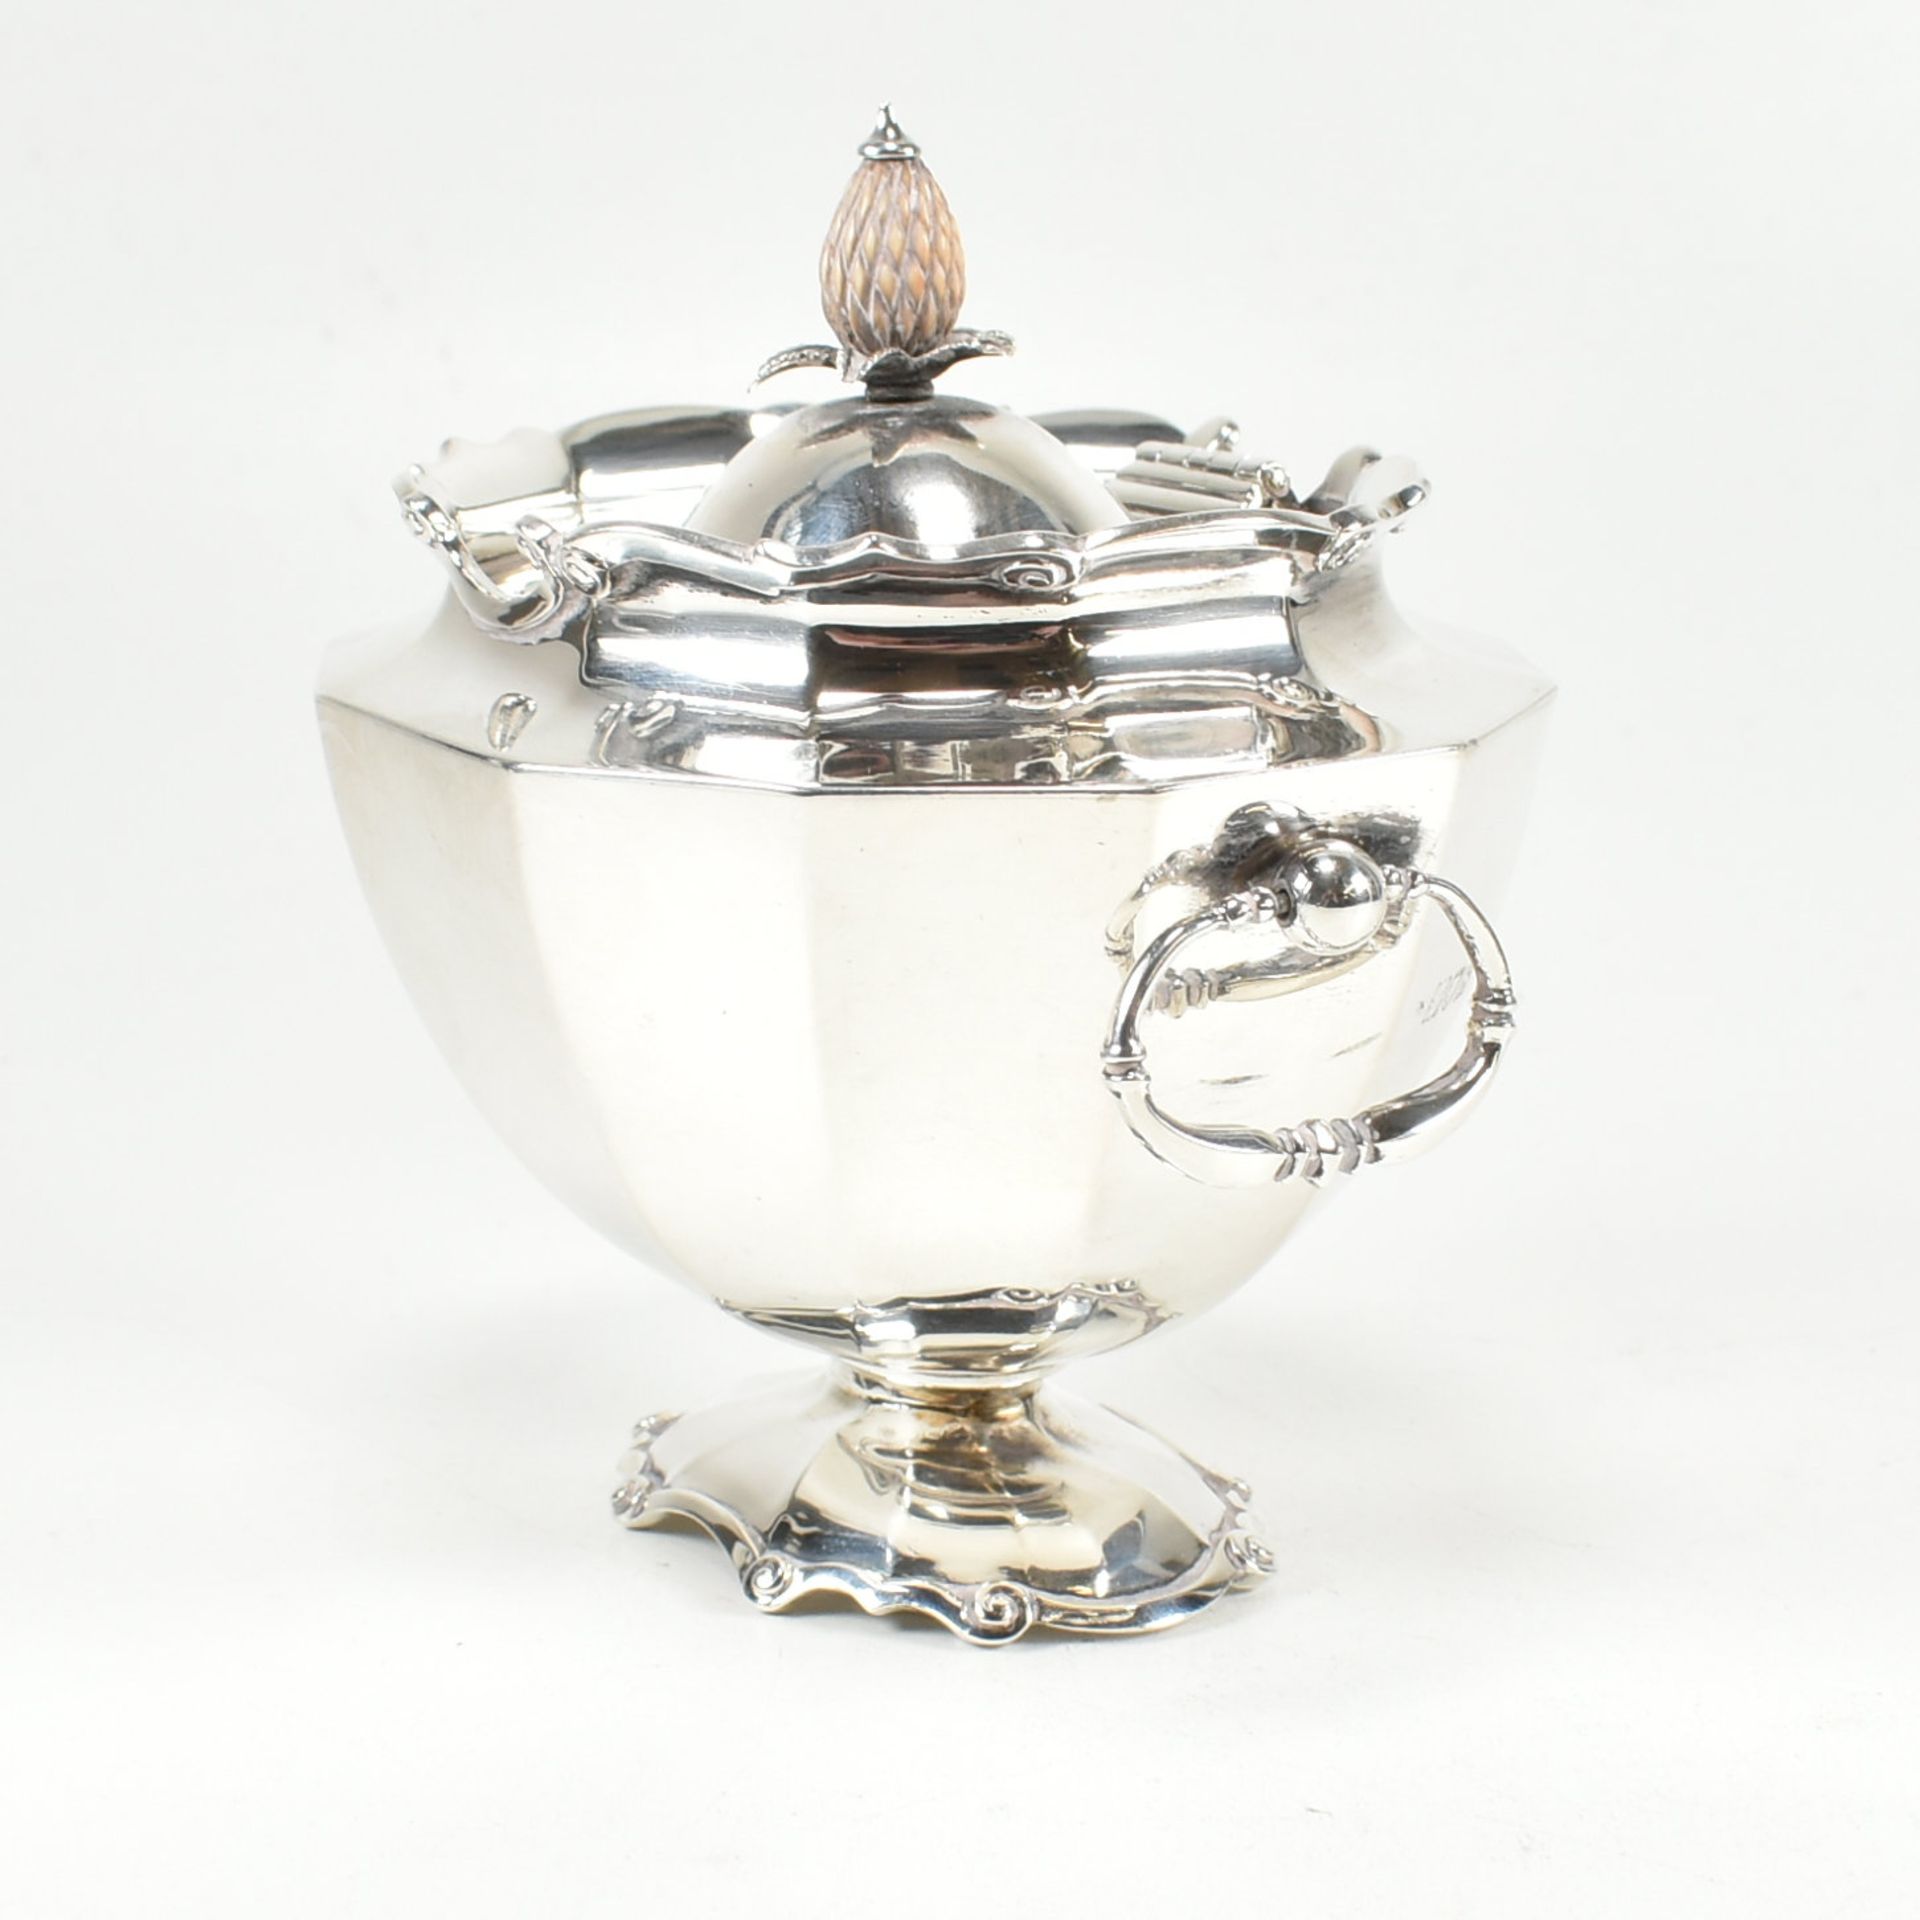 EARLY 20TH CENTURY HALLMARKED SILVER TEA CADDY - Image 4 of 8